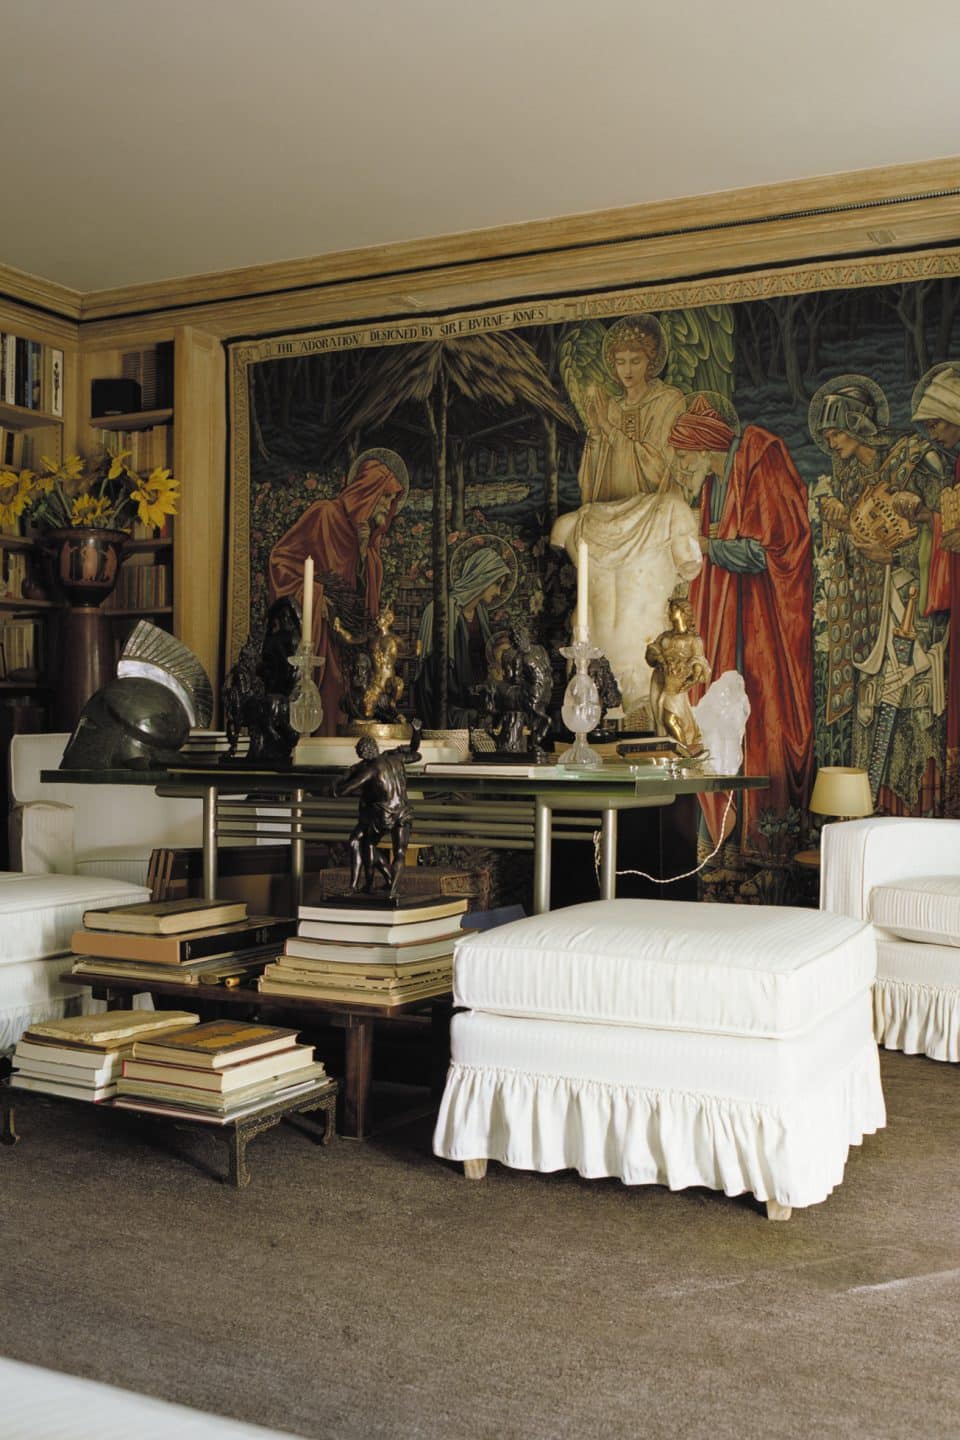 Quiet Luxury May Be Trending, but These Famous Interiors Prove That Quality and Quirk Endure